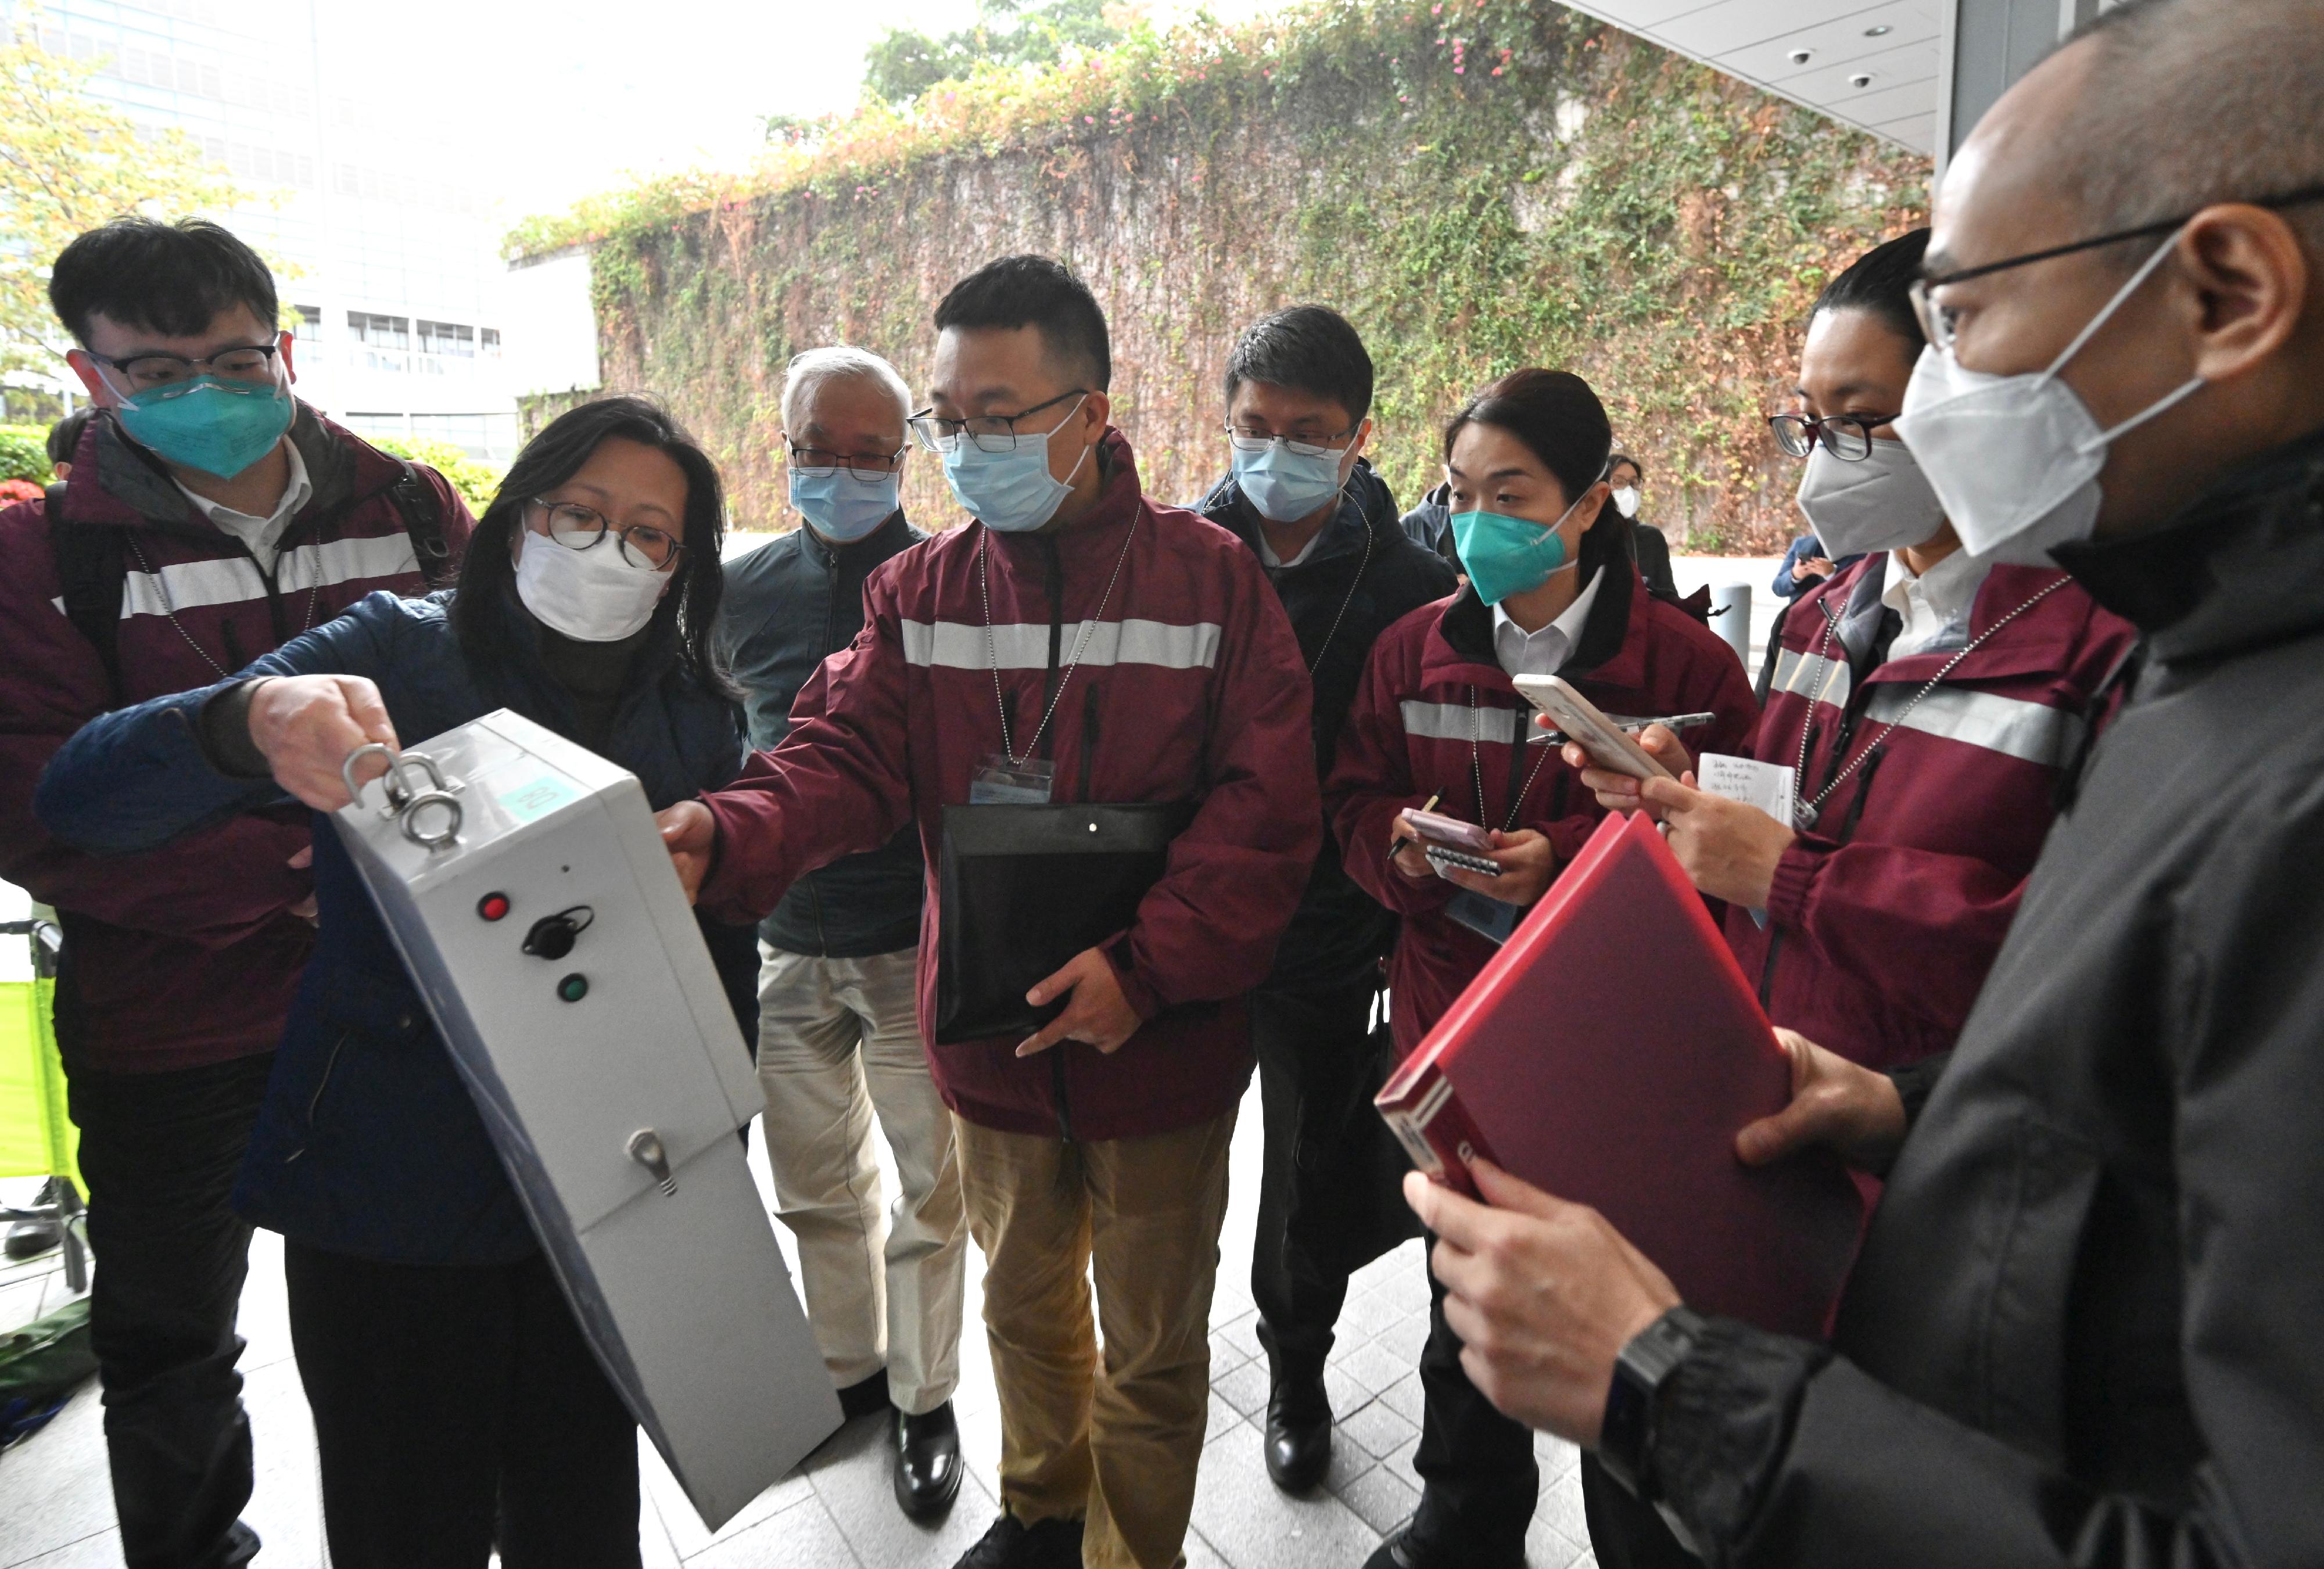 The Secretary for the Environment, Mr Wong Kam-sing, together with representatives from the Environmental Protection Department and the Drainage Services Department (DSD), as well as Professor Zhang Tong of the Department of Civil Engineering of the University of Hong Kong, brief the expert delegation on the sewage surveillance plan of Hong Kong today (February 20). The DSD has also arranged an on-site demonstration of sewage sample collection. Picture shows the Director of Drainage Services, Ms Alice Pang (second left), briefing the expert delegation on the sewage sample collection at a temporary surveillance station, along with the Under Secretary for the Environment, Mr Tse Chin-wan (third left).